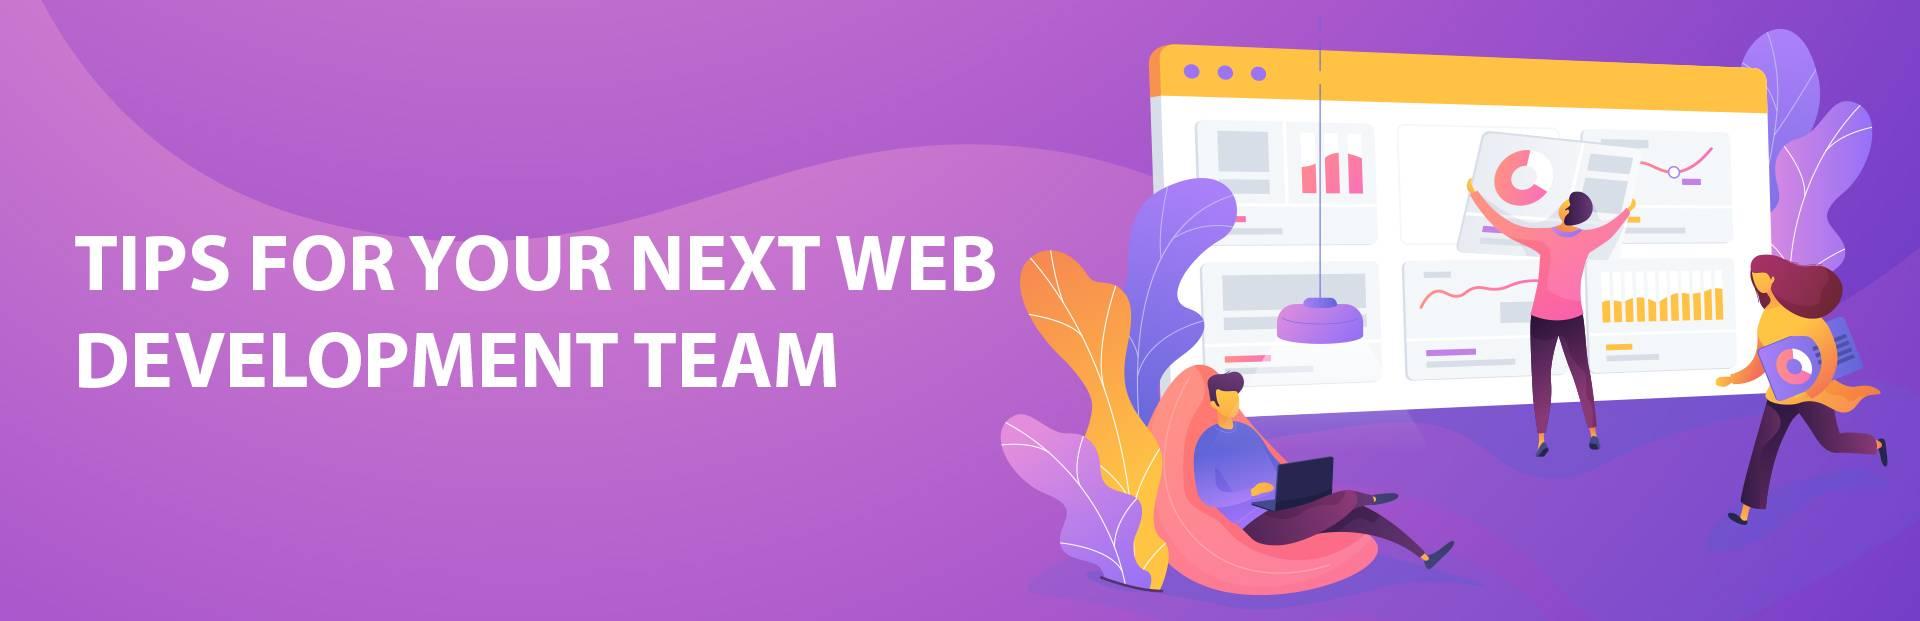 We ain’t making the same mistakes, keep these tips hands for your next web development team